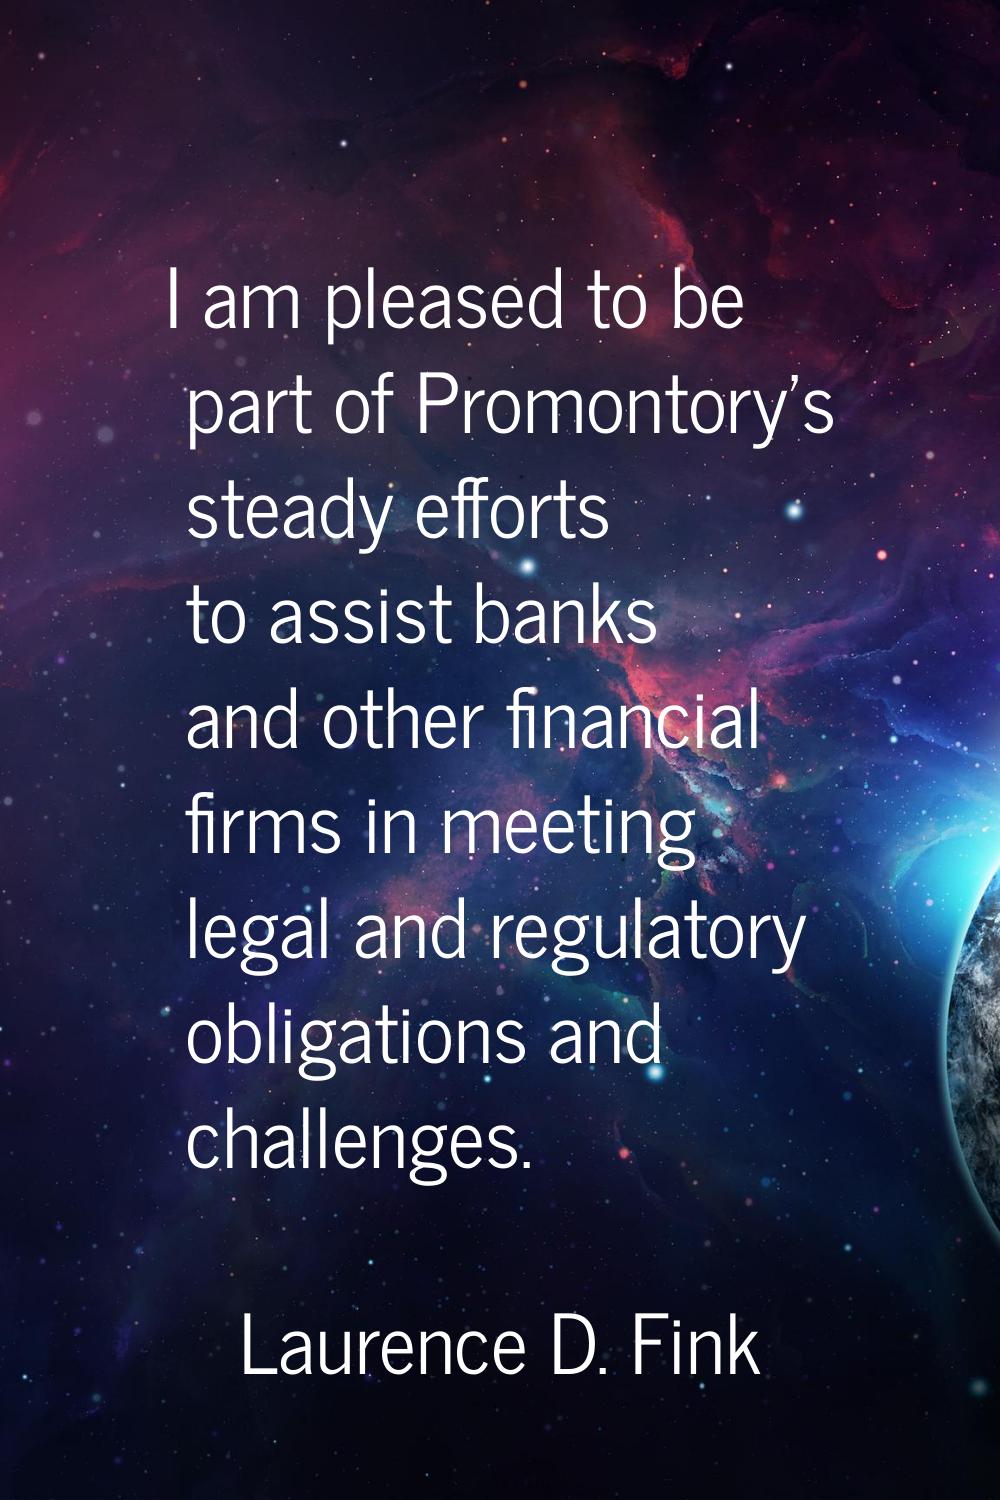 I am pleased to be part of Promontory's steady efforts to assist banks and other financial firms in